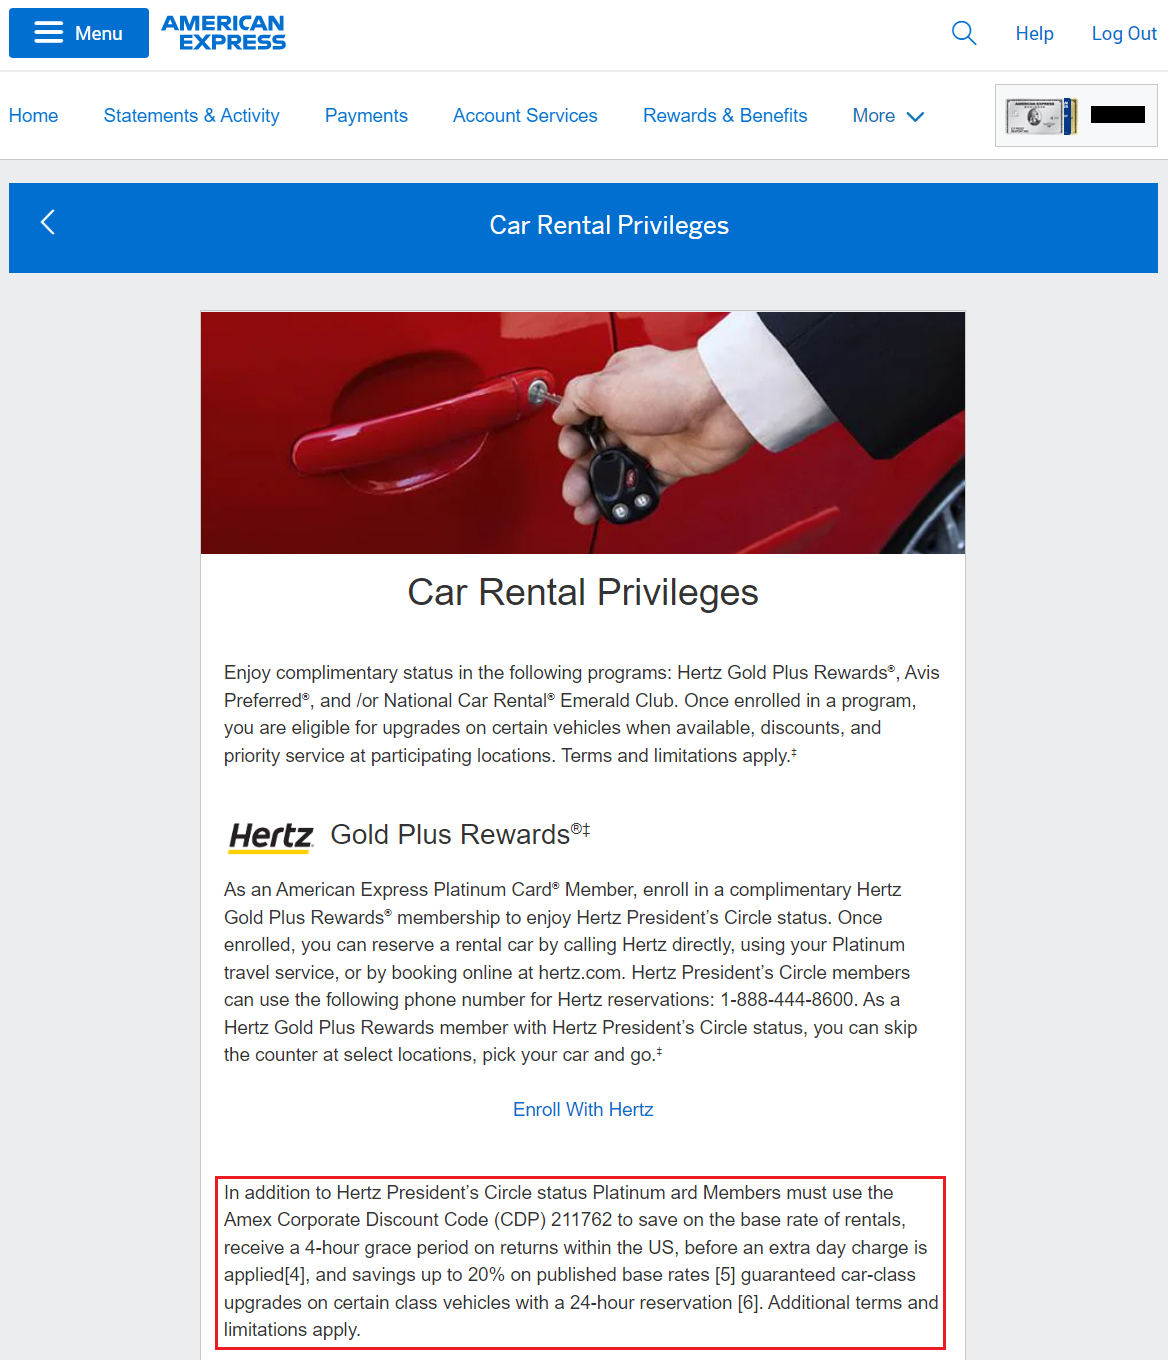 Does Hertz Accept Credit Cards?